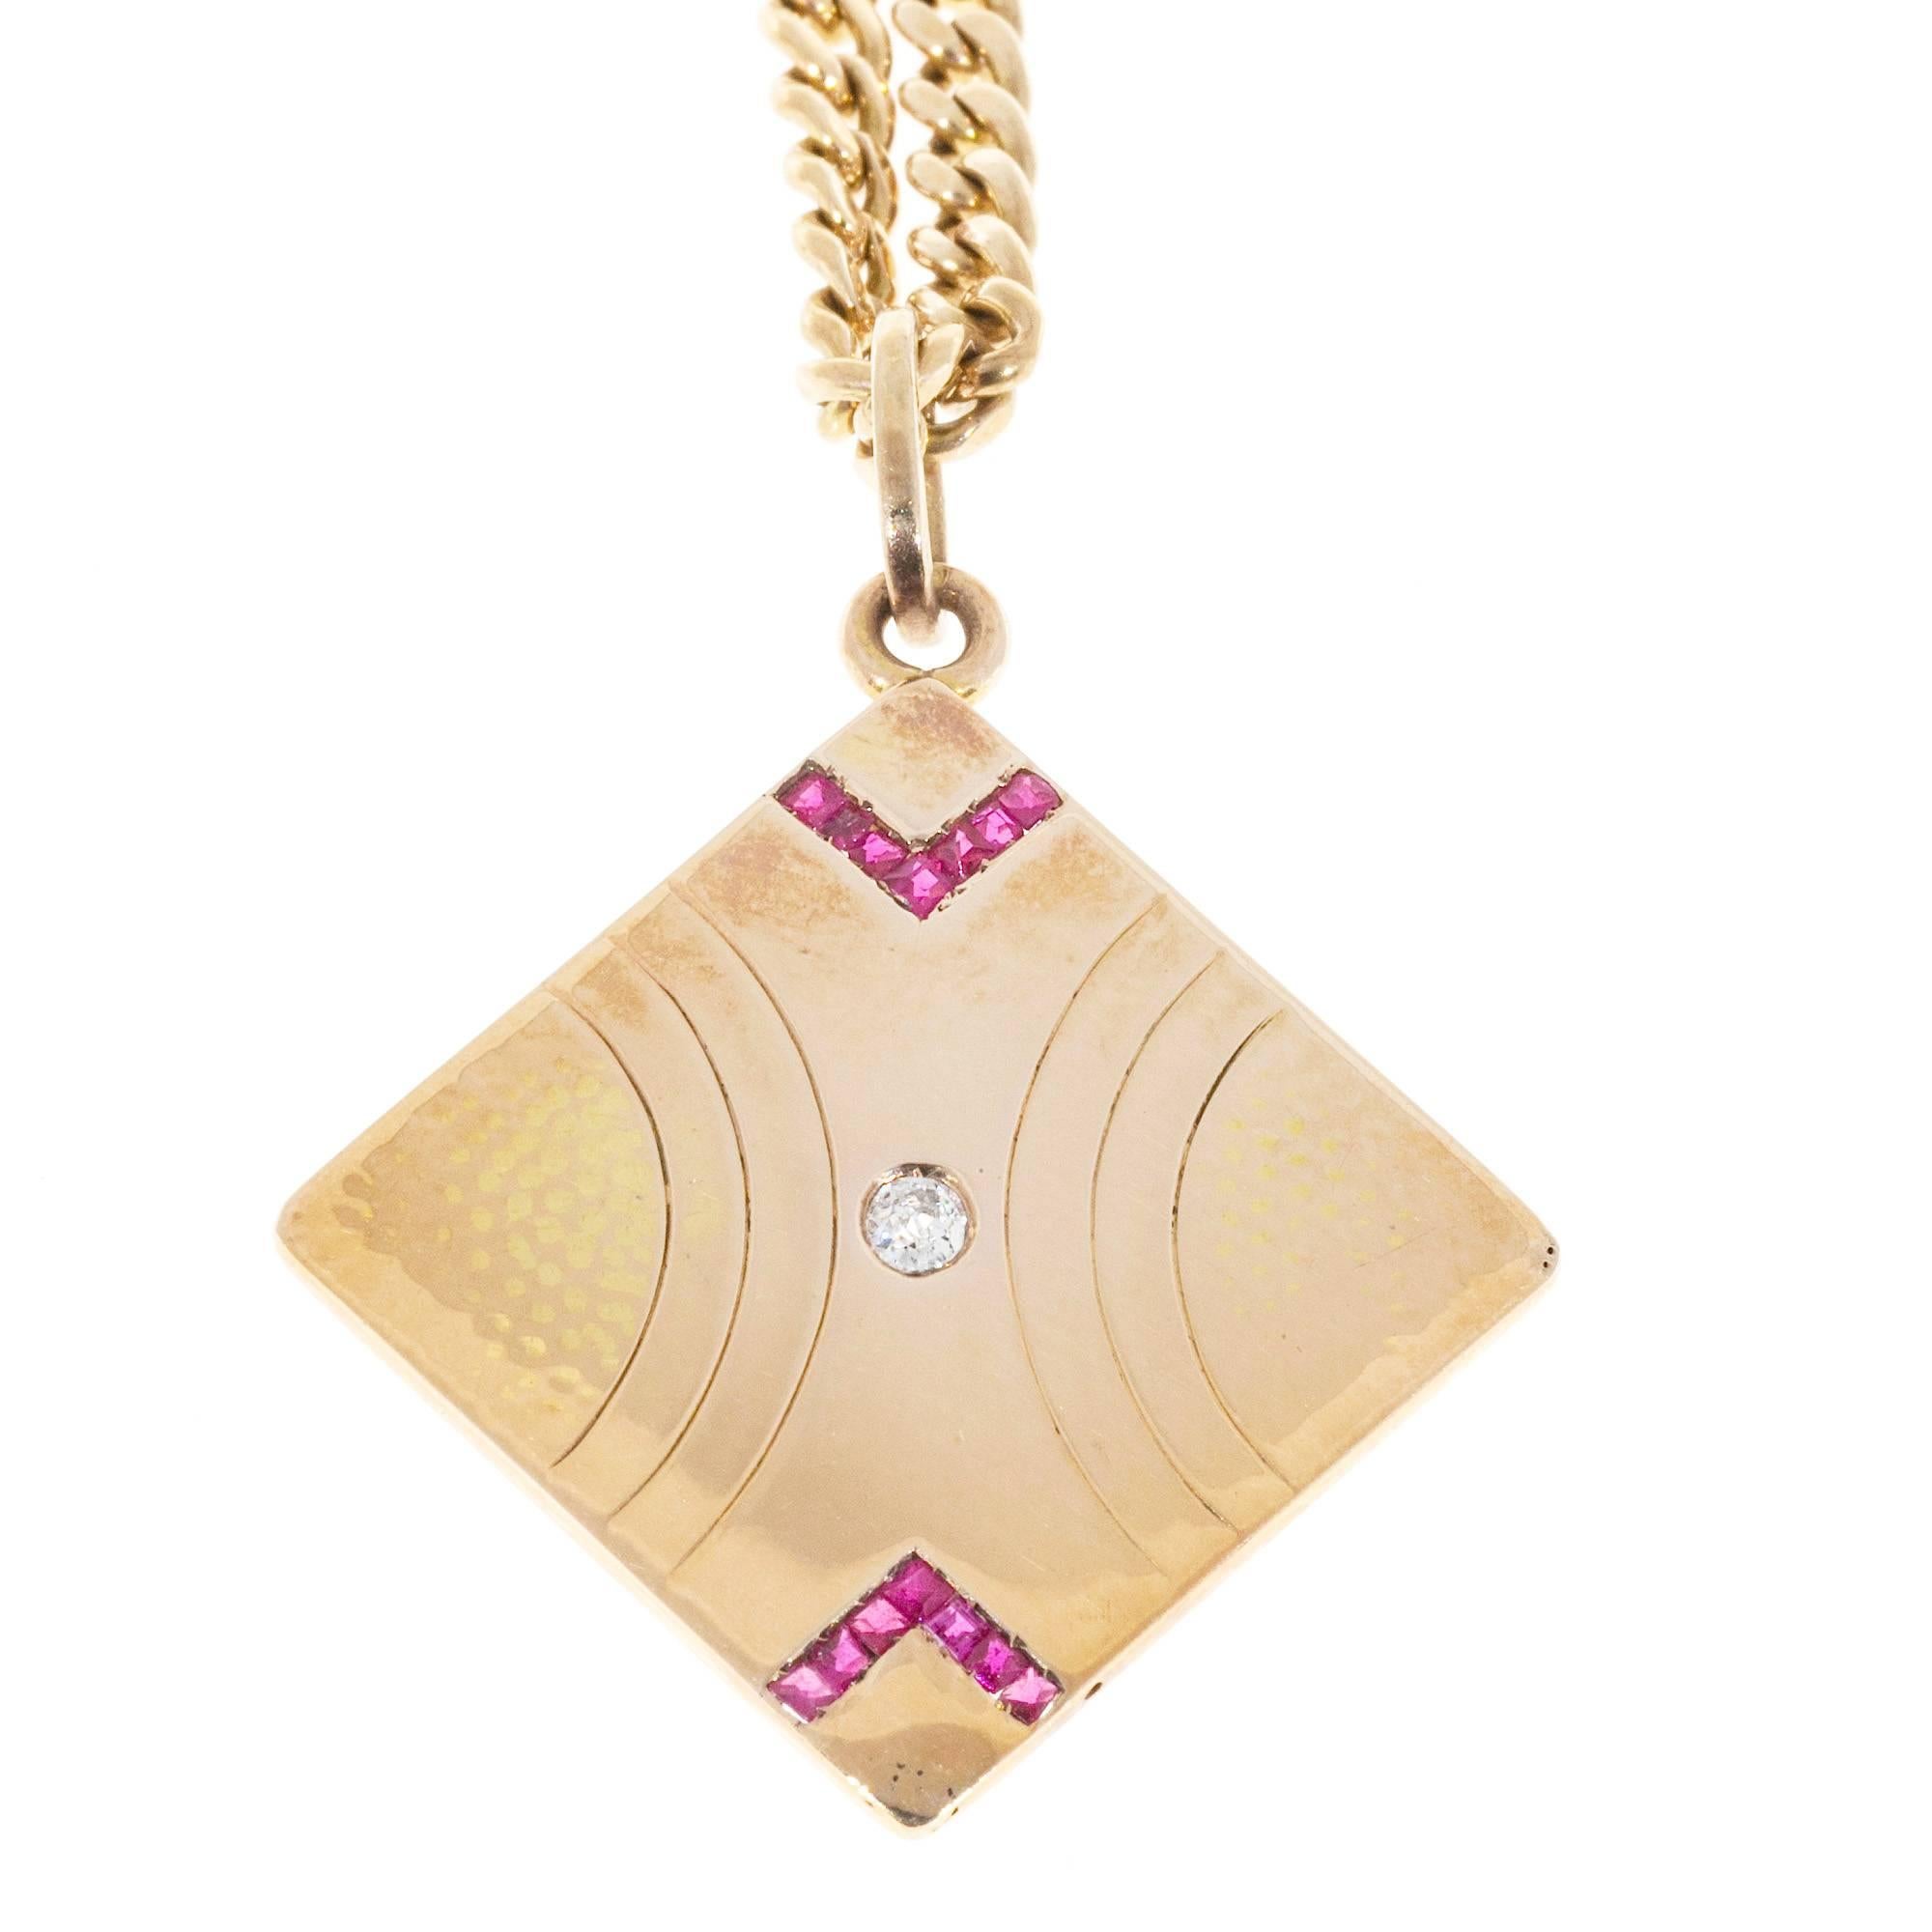 14k rose gold chain with spring ring.  17 inches long. Handmade textured and 14k pink gold pendant set with one center diamond and 10 square French cut genuine Rubies. The left and right side of the pendant are textured. Circa 1890’s.

.15cts old